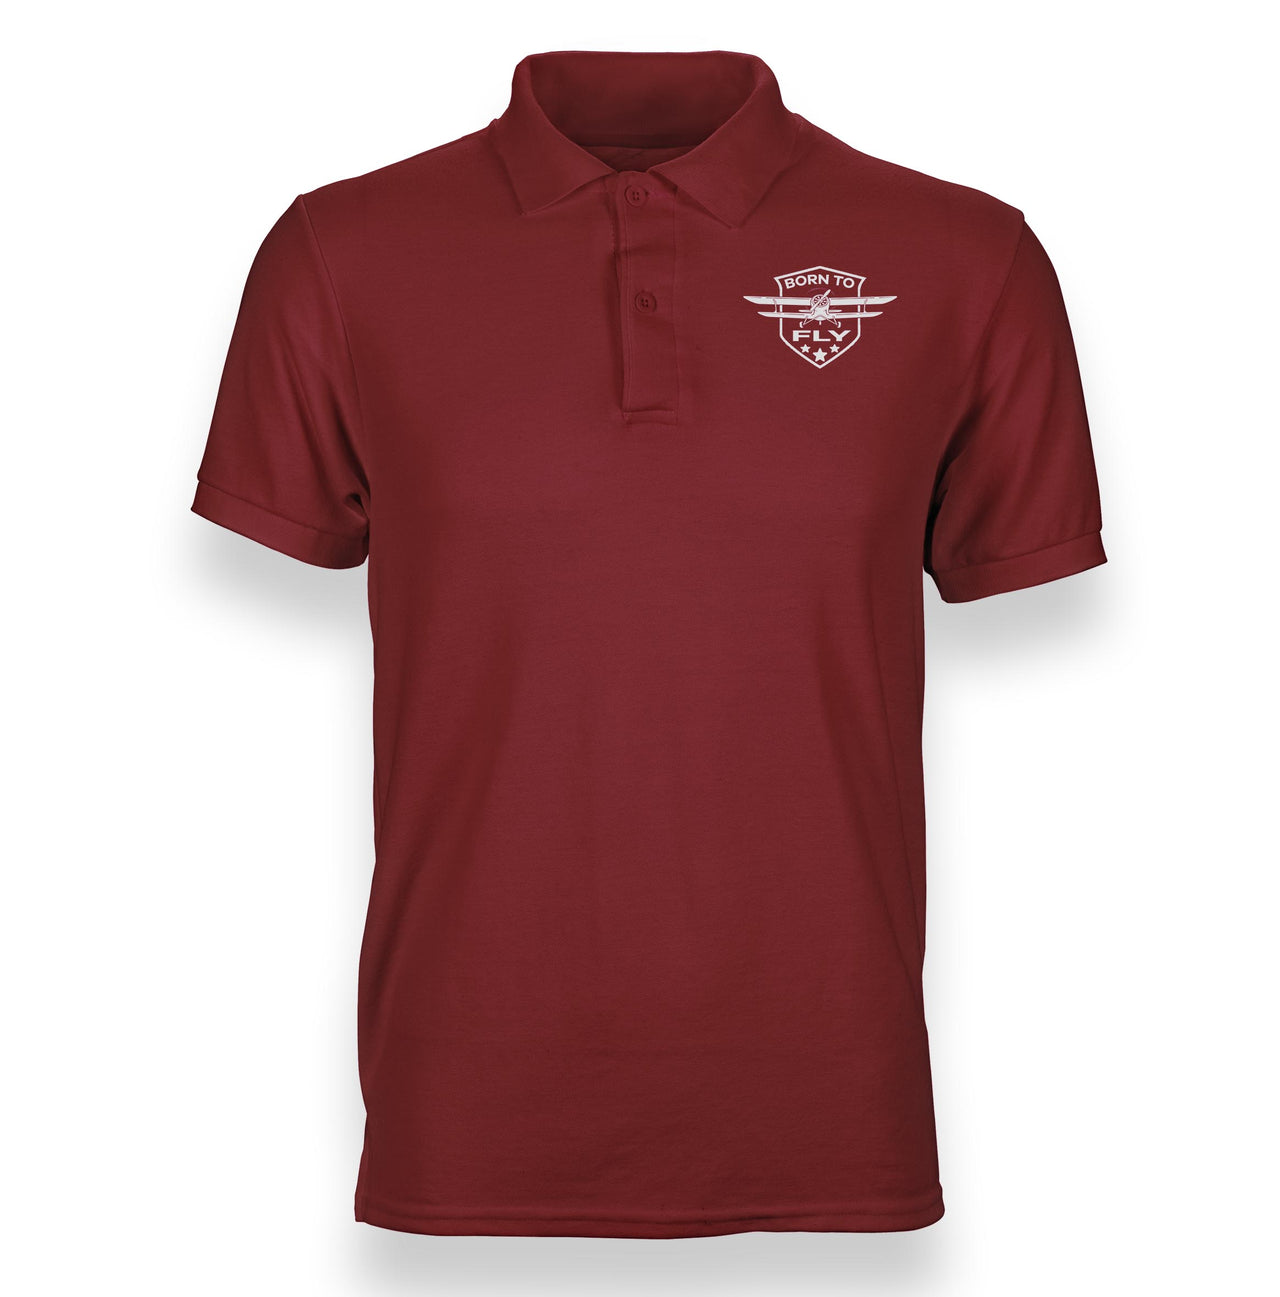 Super Born to Fly Designed Polo T-Shirts